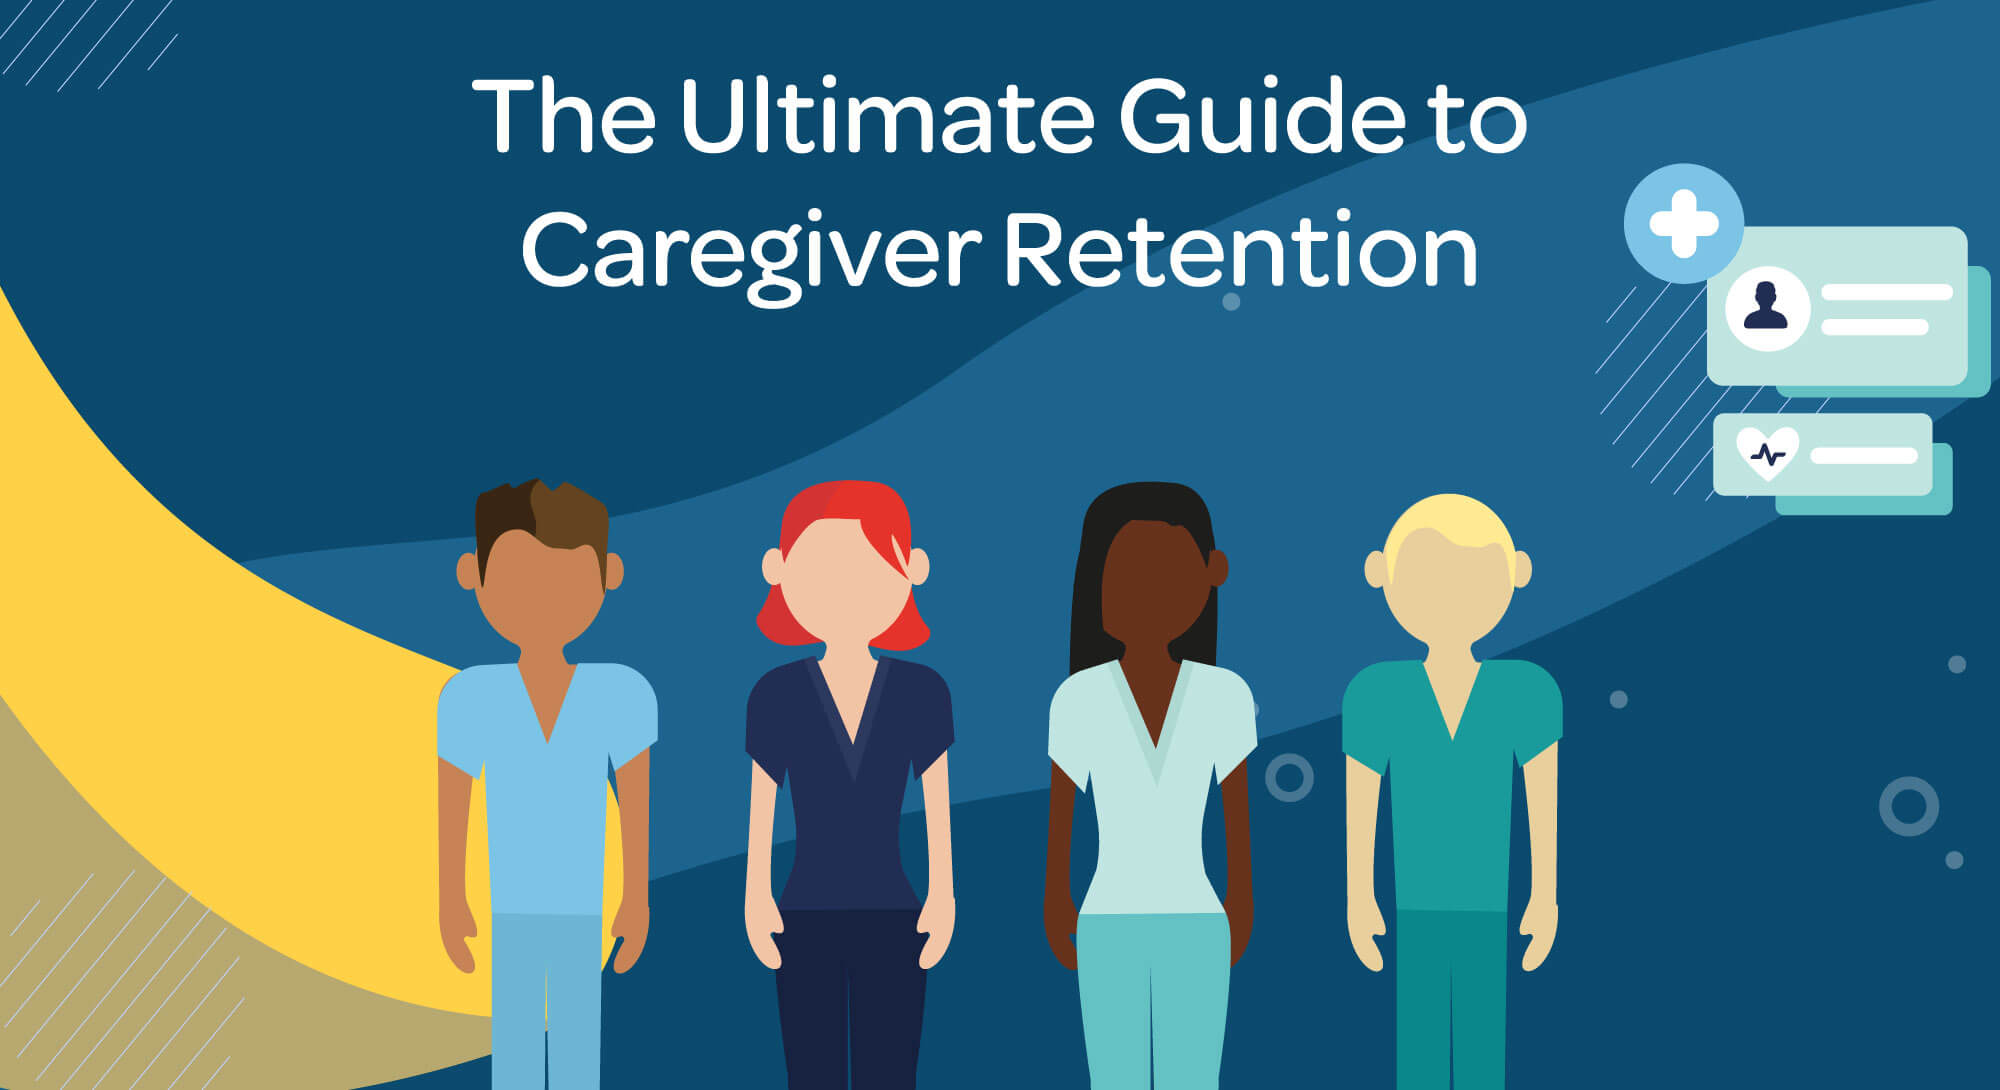 Image for the ultimate guide to caregiver retention